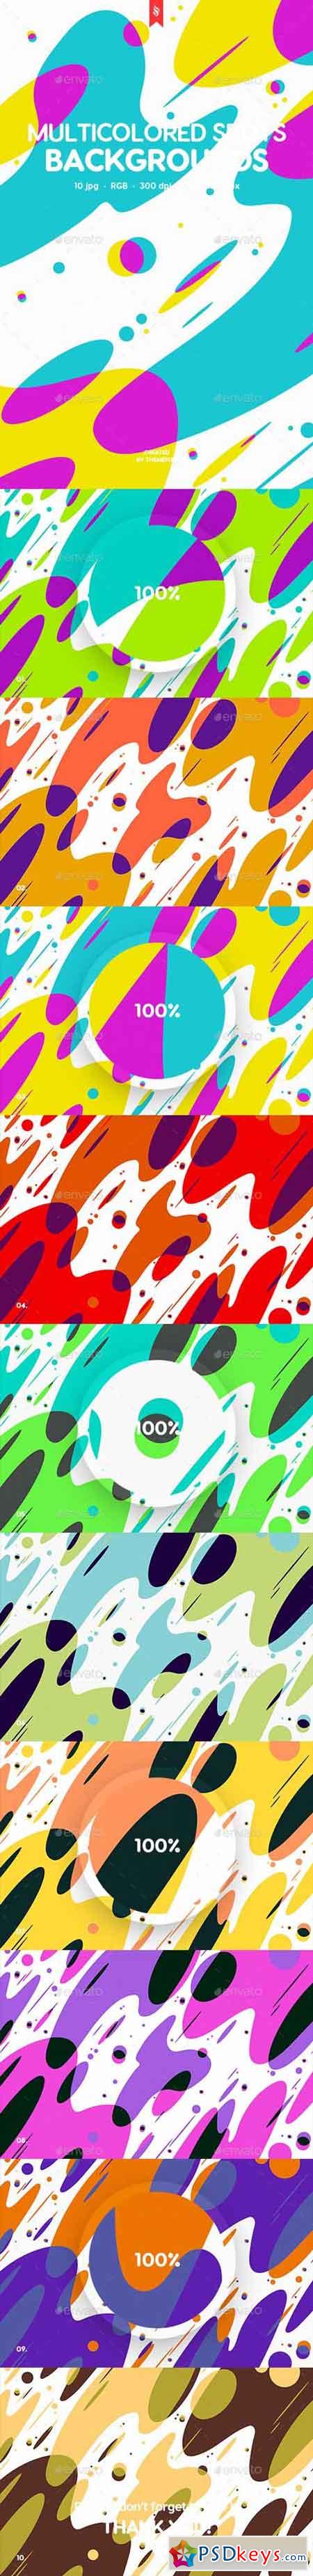 Abstract Multicolored Spots Backgrounds 20105853